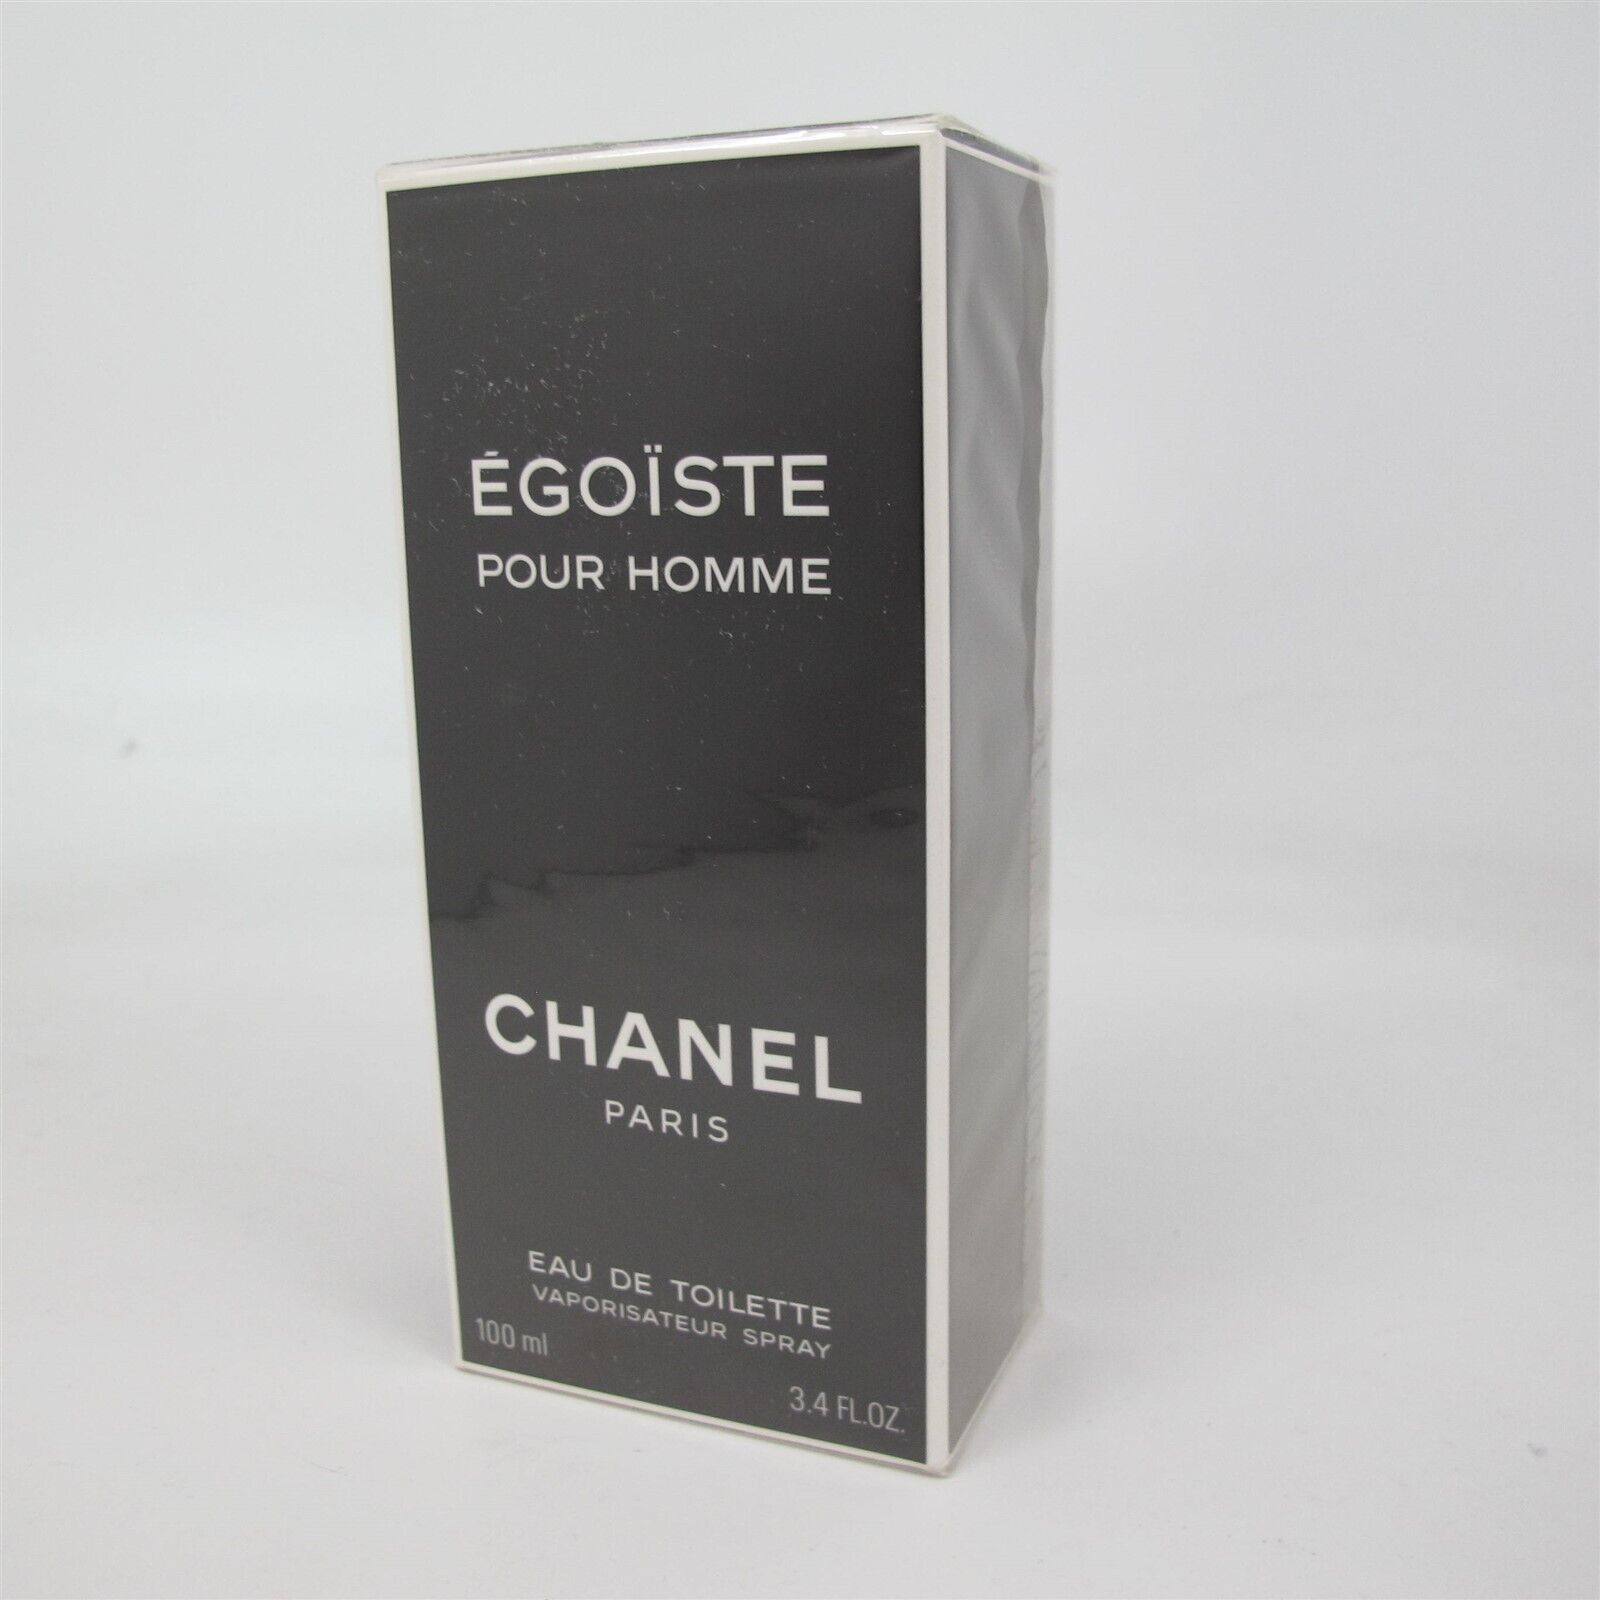 PLATINUM EGOISTE by Chanel 75 ml/ 2.5 oz After Shave Lotion *Open Box*